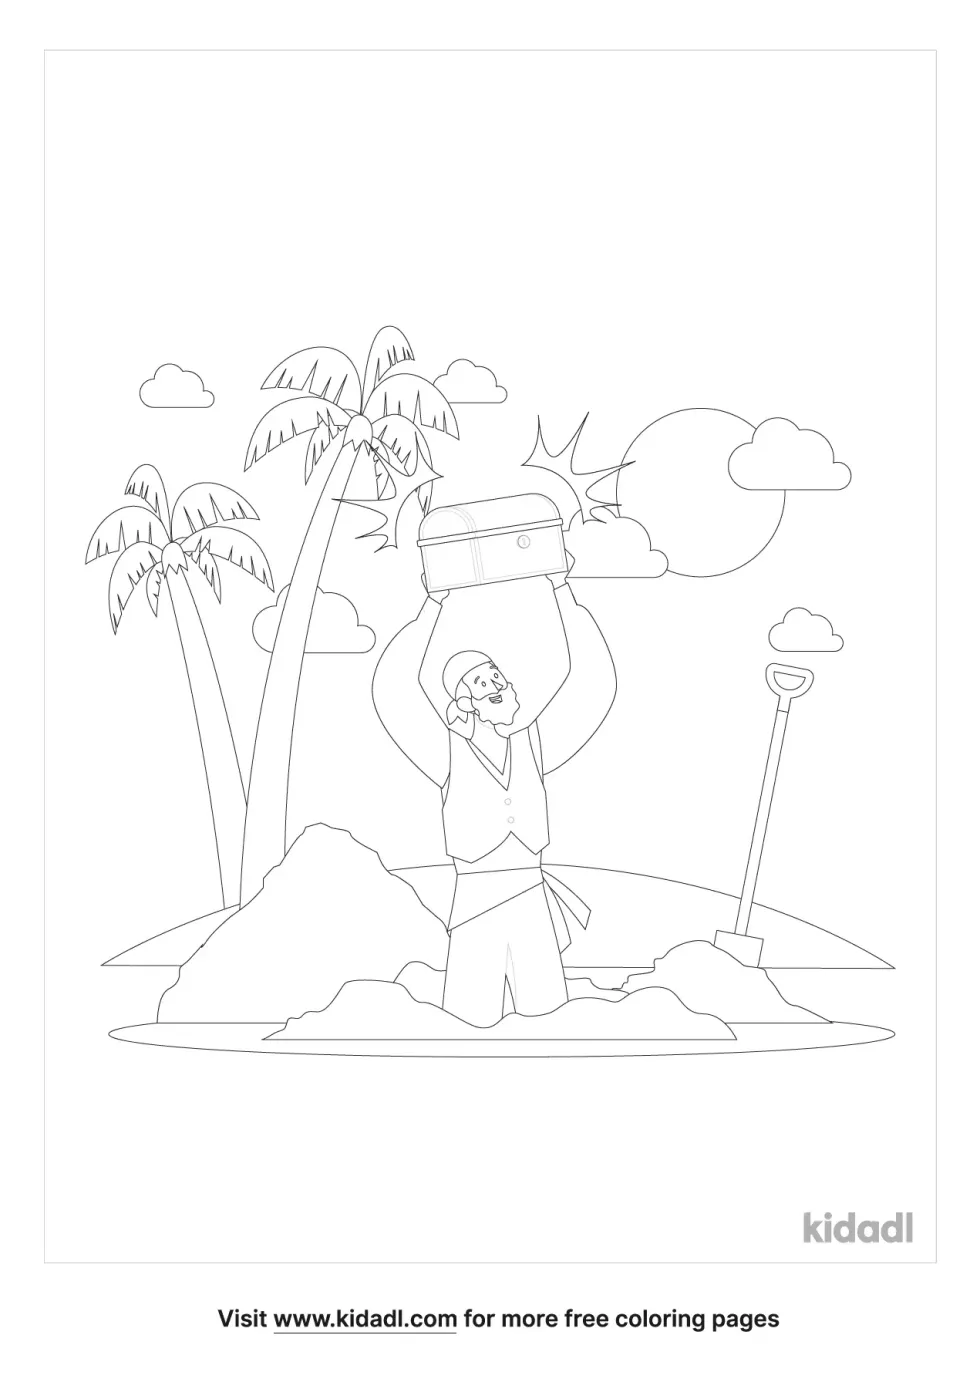 Parable Of The Hidden Treasure Coloring Page